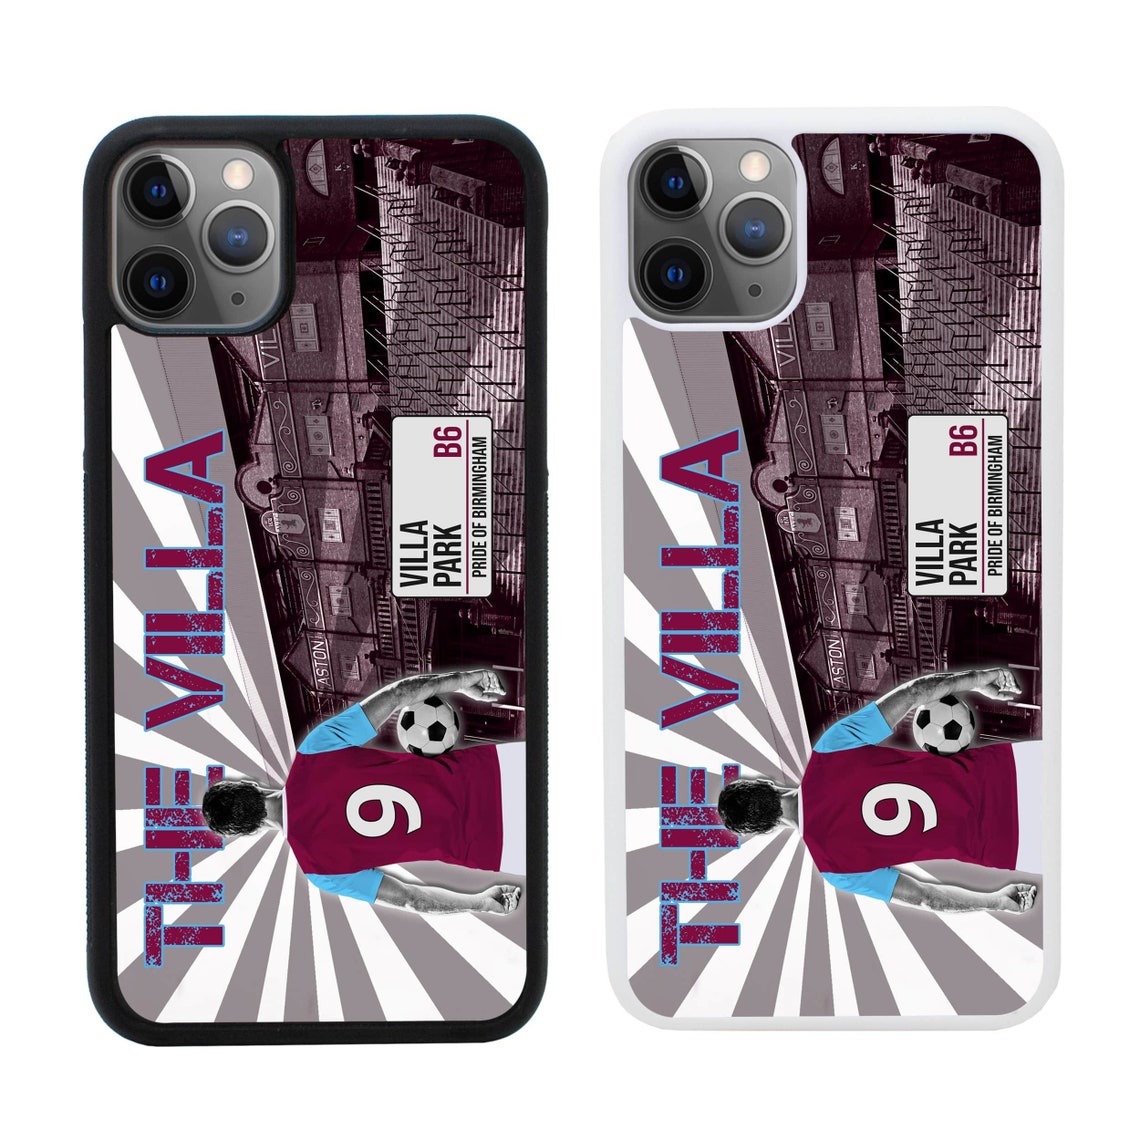 Stadium Case Phone Cover for Apple iPhone 11 Pro Max Etsy